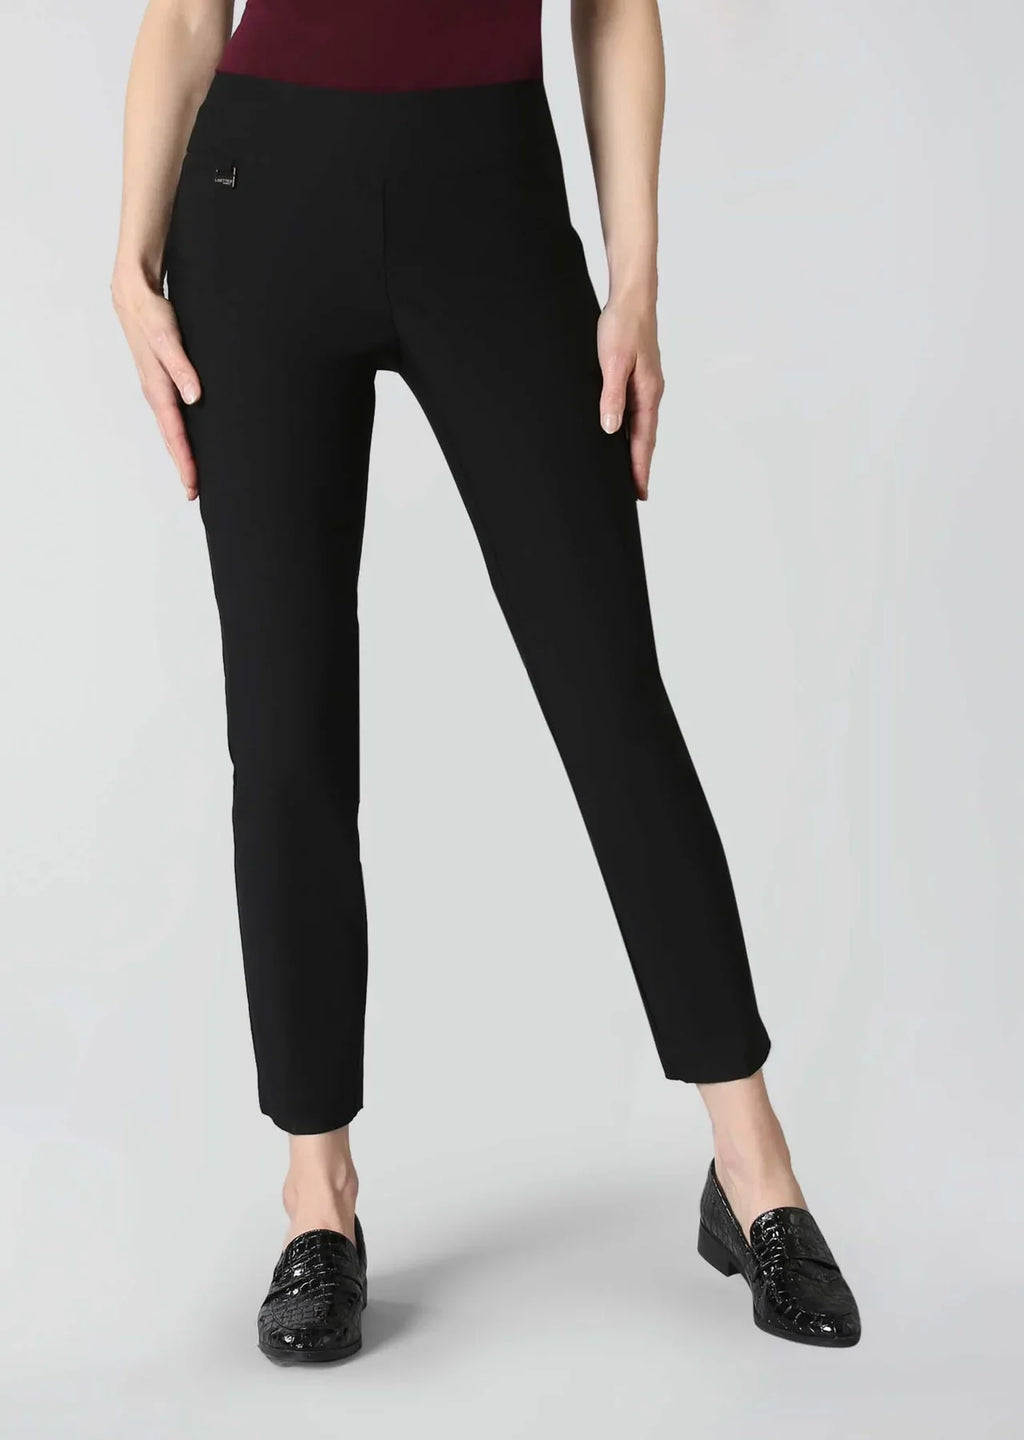 801 Slim Ankle Pant - Lisette L Montreal – Post Office by Shannon Passero